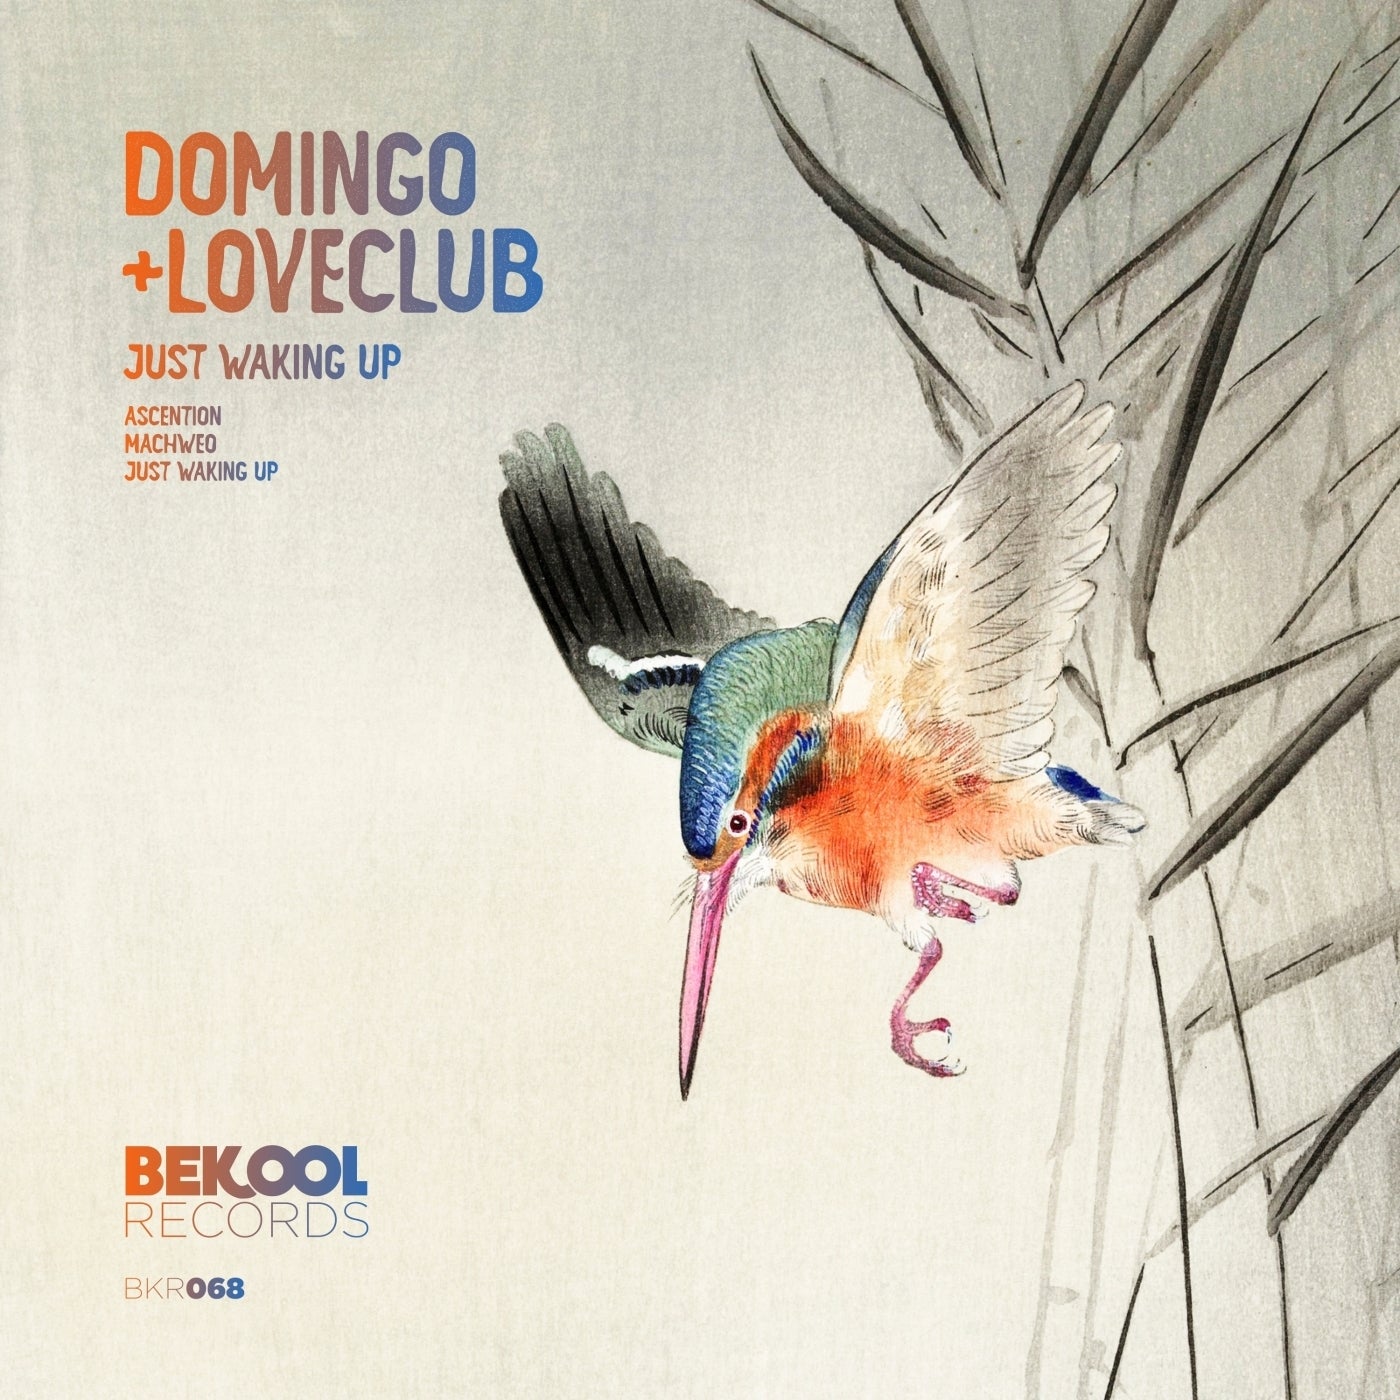 Cover - Loveclub, Domingo + - Just Waking Up (Original Mix)